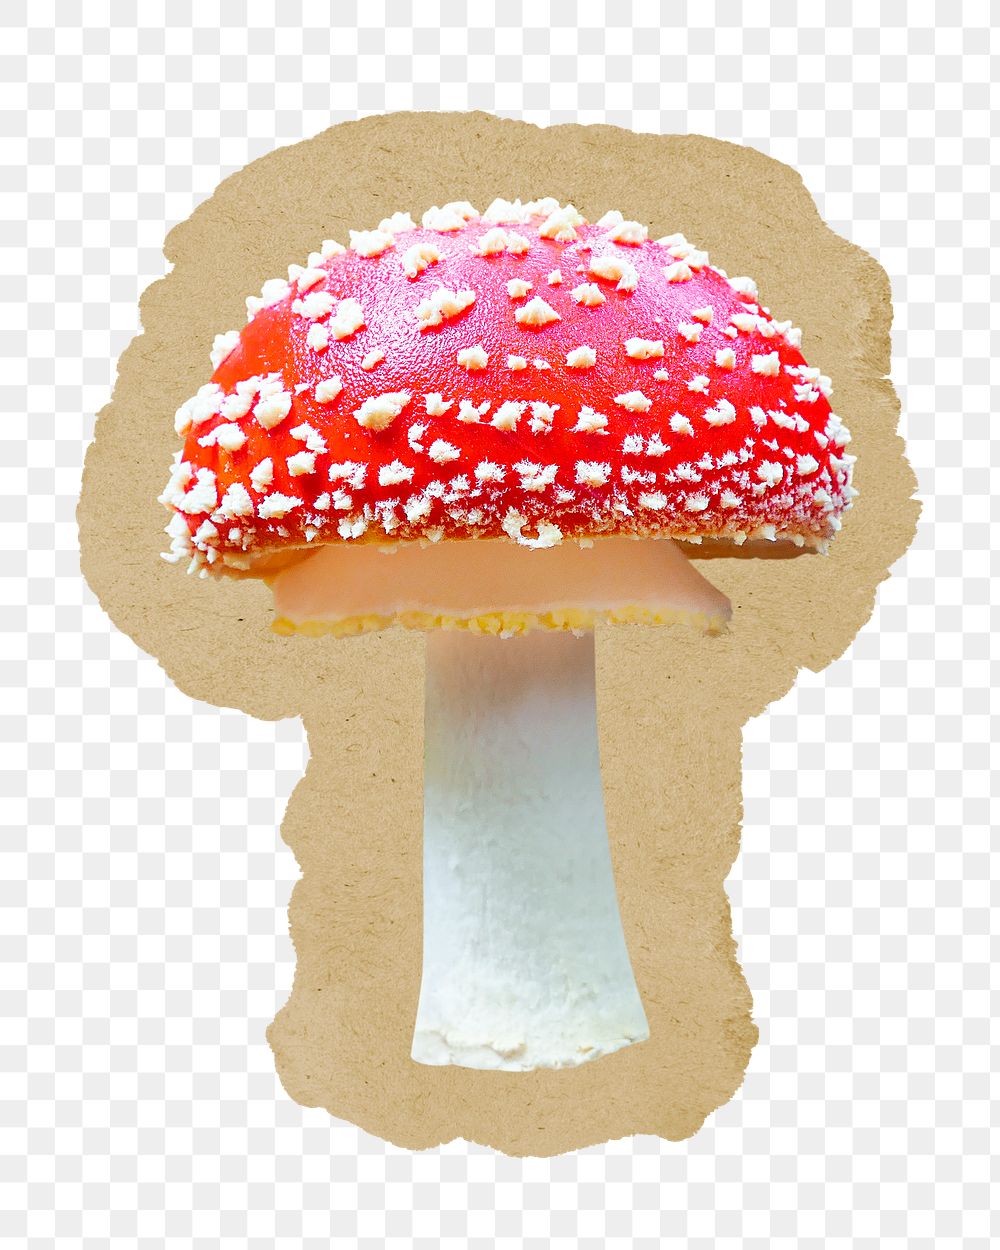 Poisonous mushroom png sticker, ripped paper, transparent background